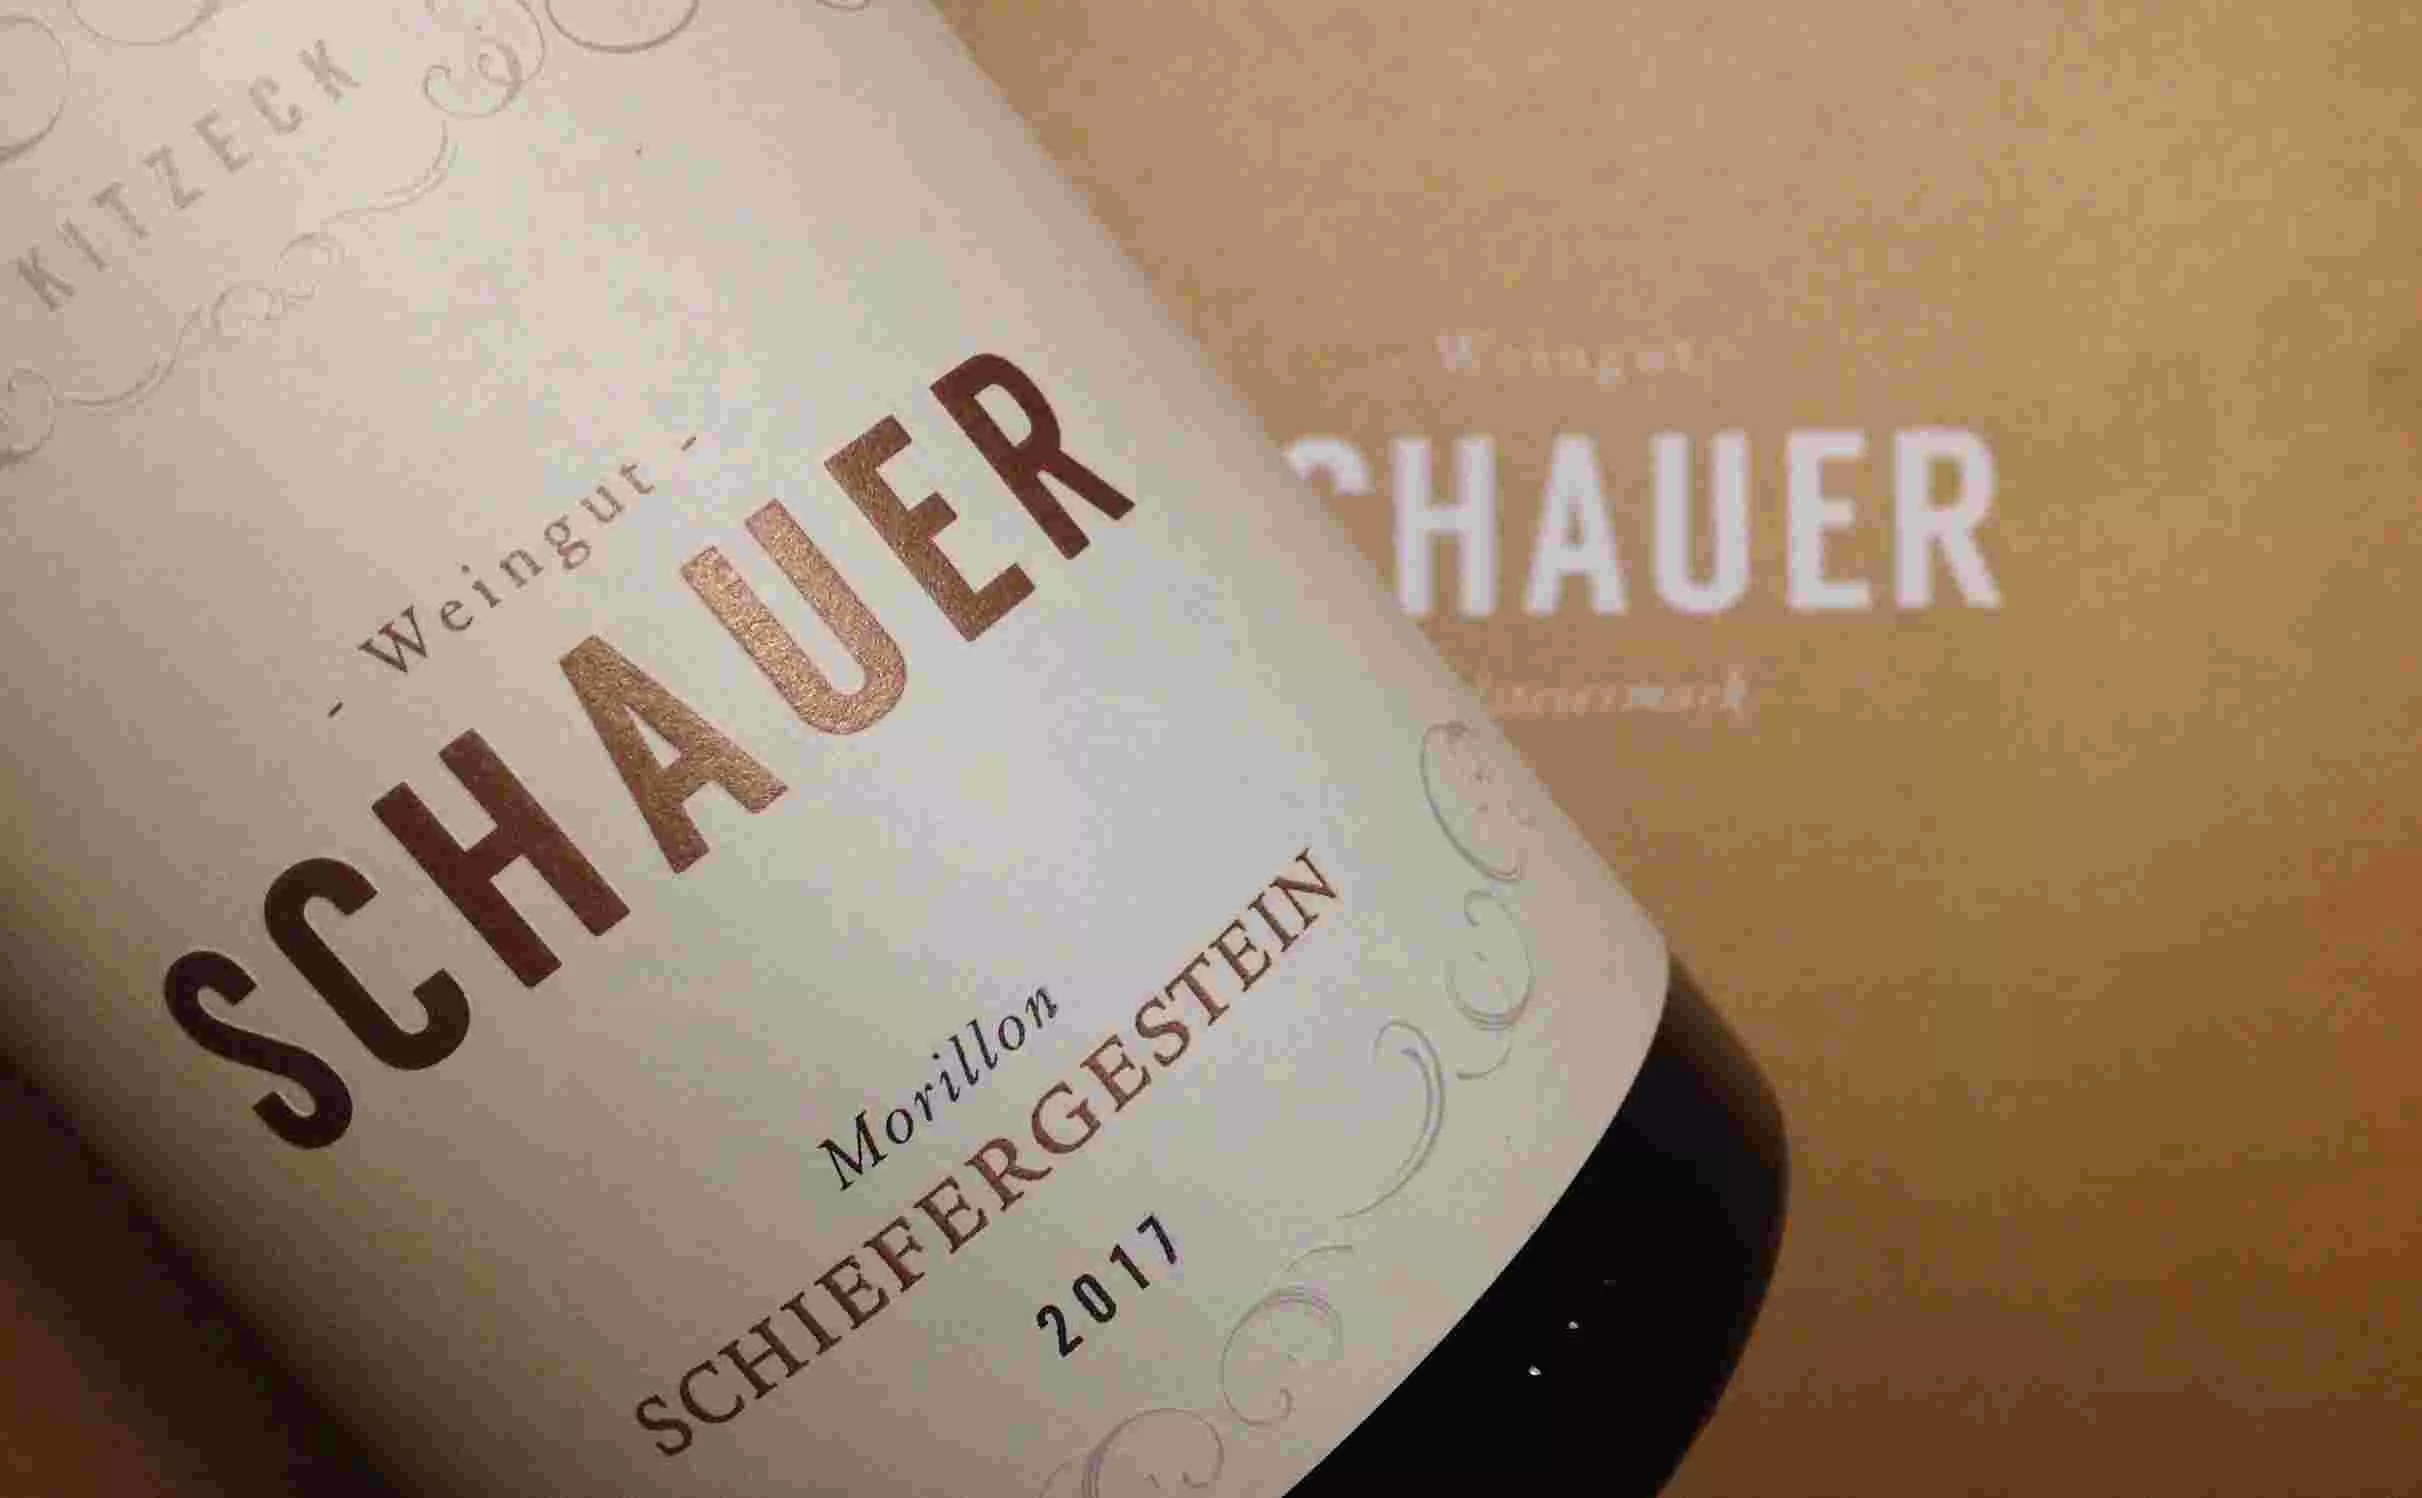 Schauer Winery in Austria, Europe | Wineries - Rated 0.9